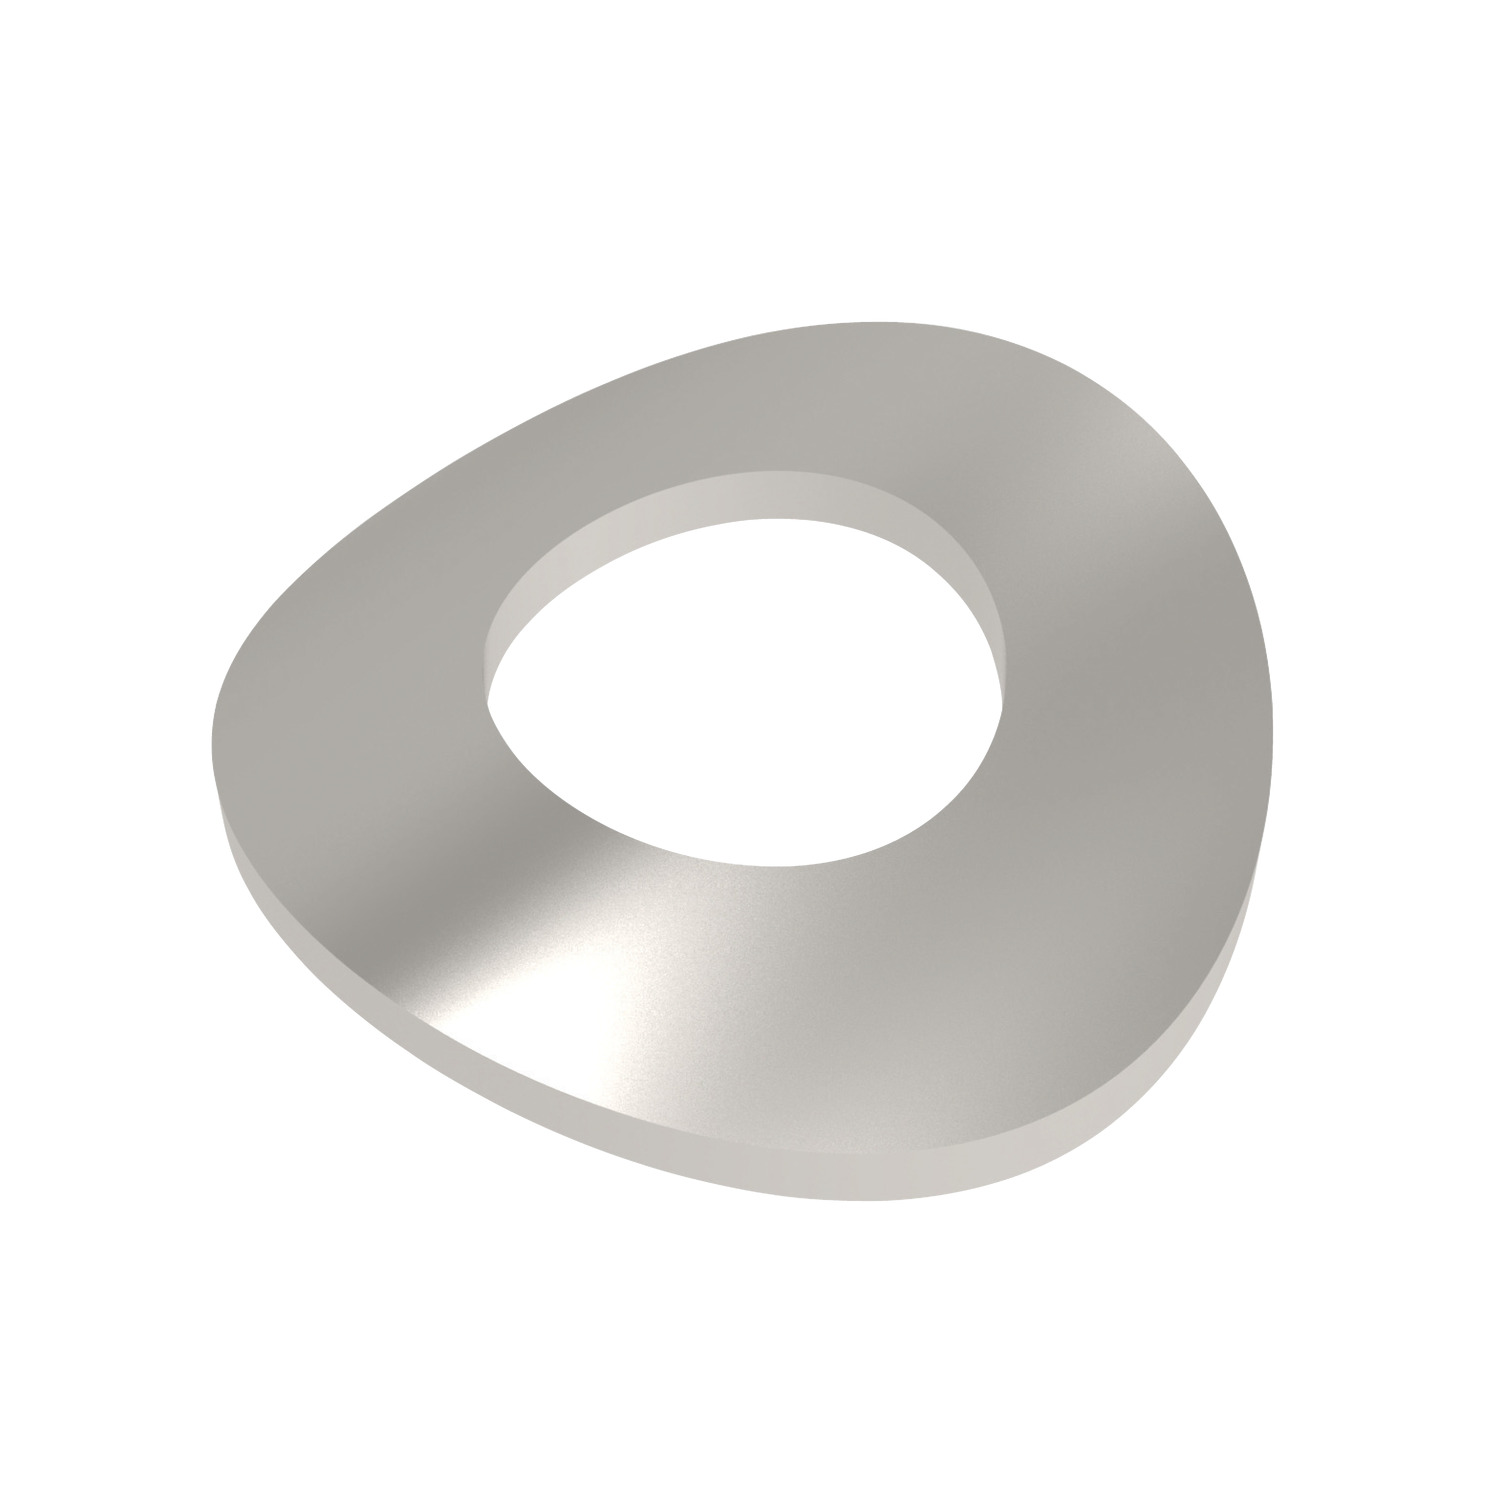 Spring Washers Their curved design offers tension when pressed to maintain tension where vibrations or the expansion and contraction in a connection may otherwise dislodge regular washers.